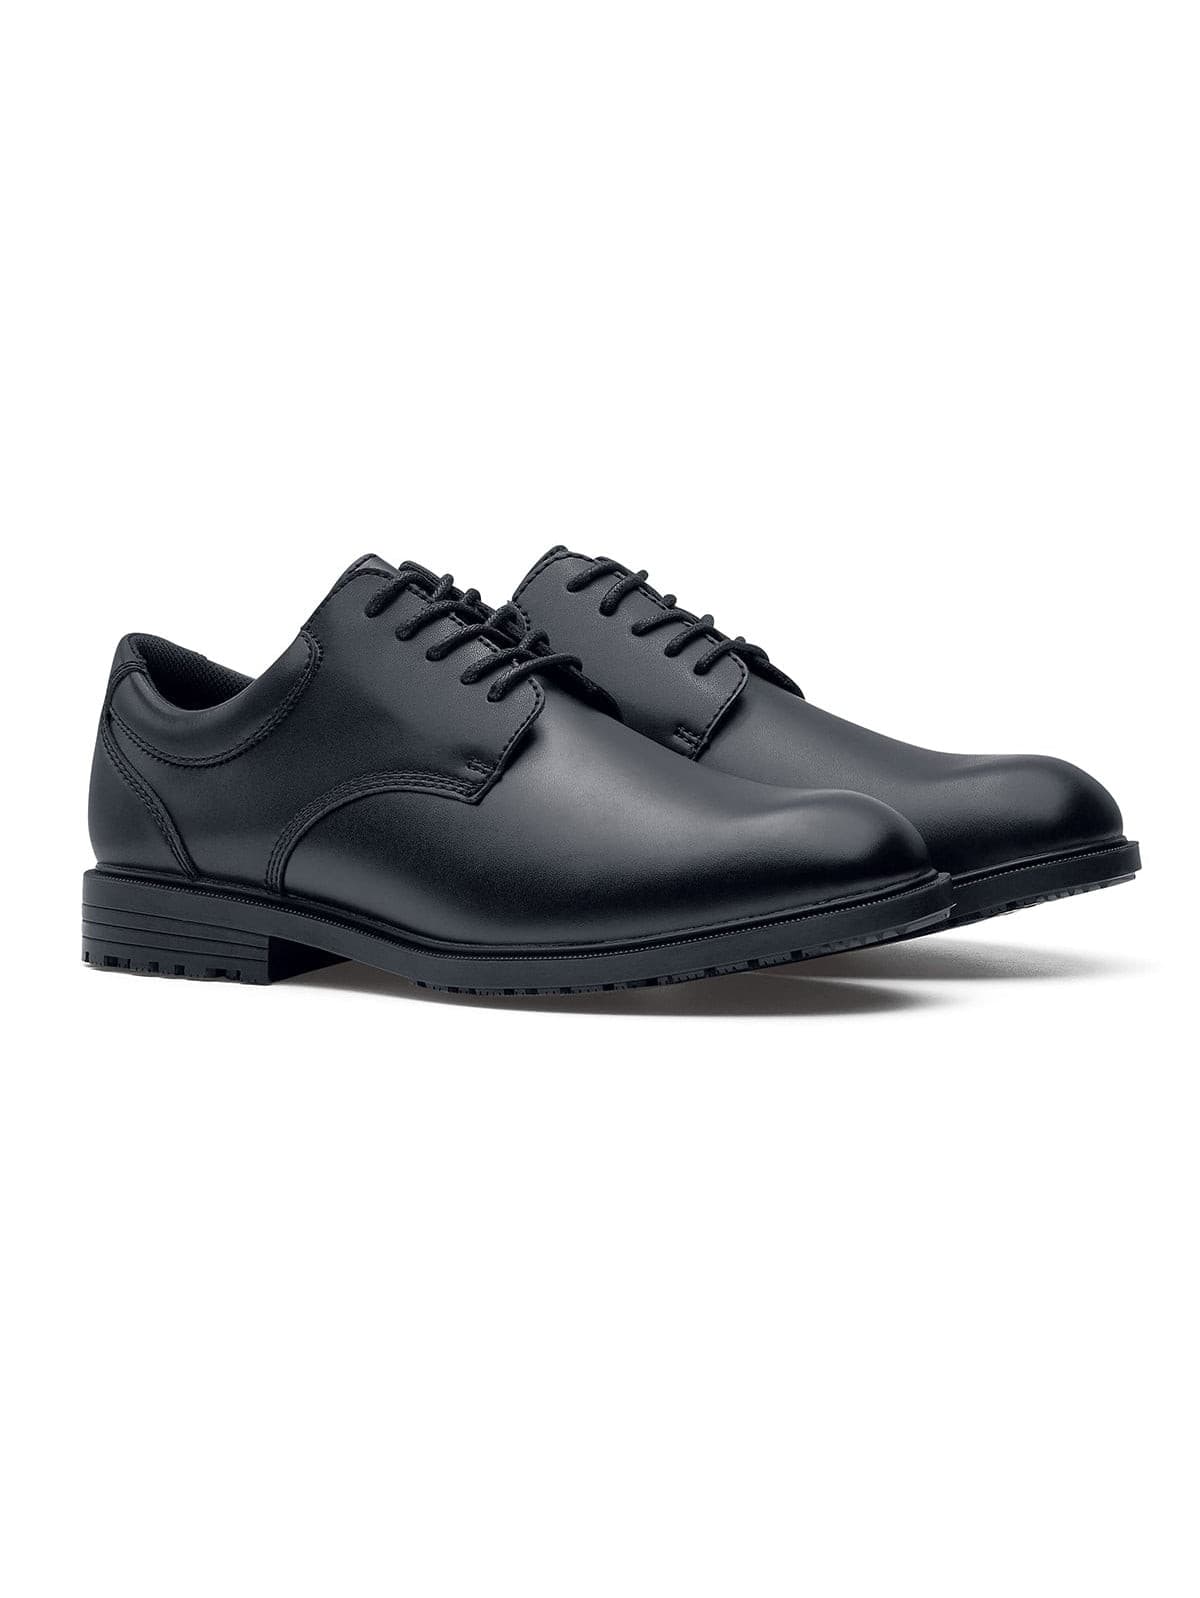 Men's Work Shoe Cambridge III by Shoes For Crews -  ChefsCotton